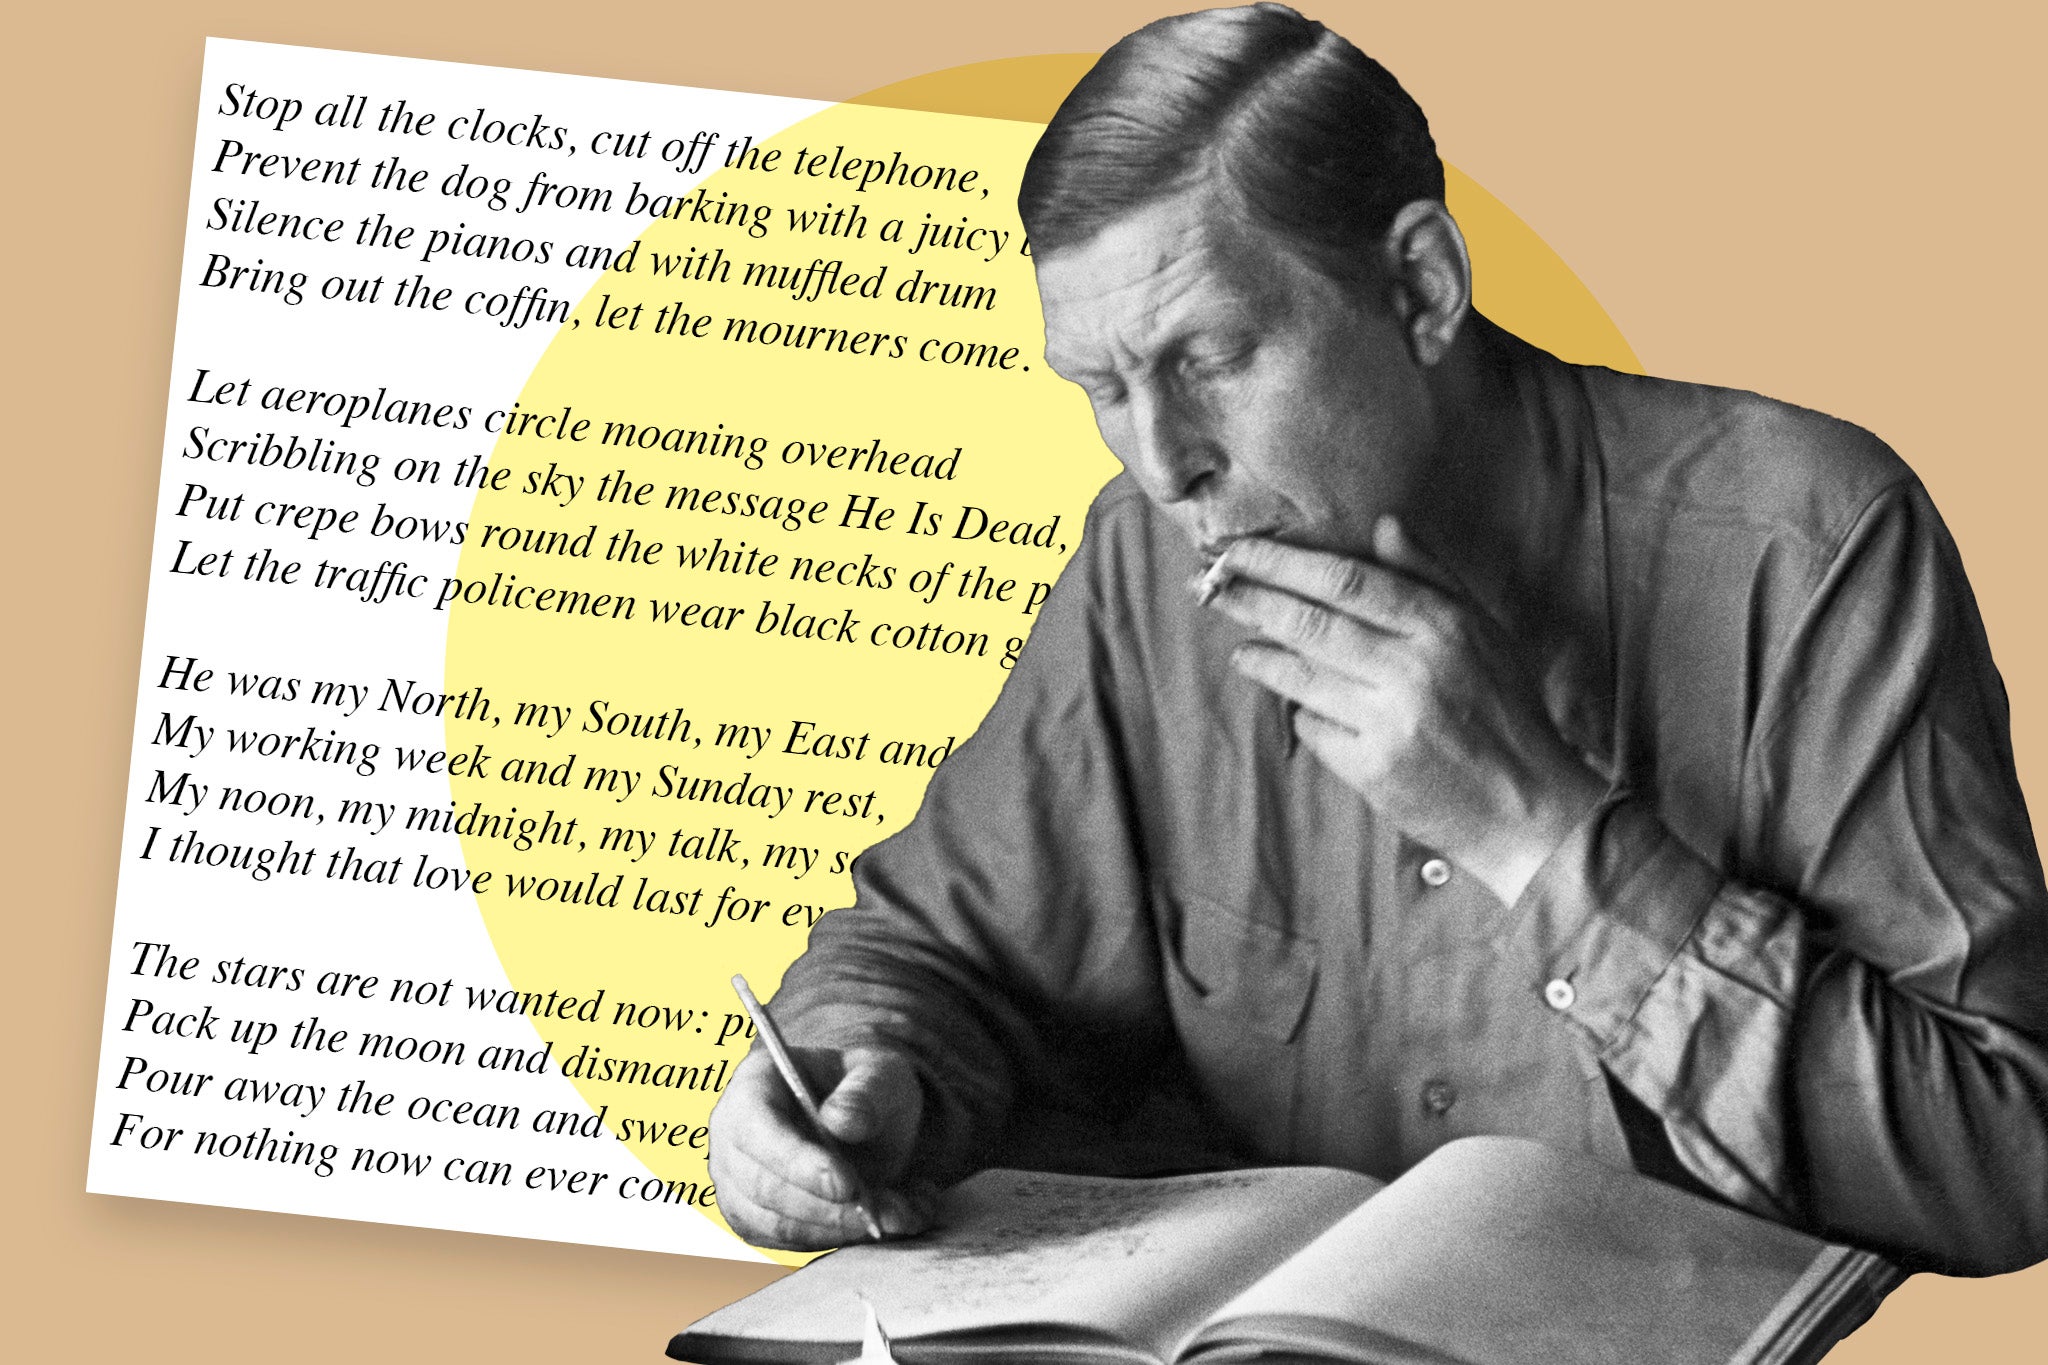 WH Auden, one of the 20th century’s best-loved poets, died 50 years ago